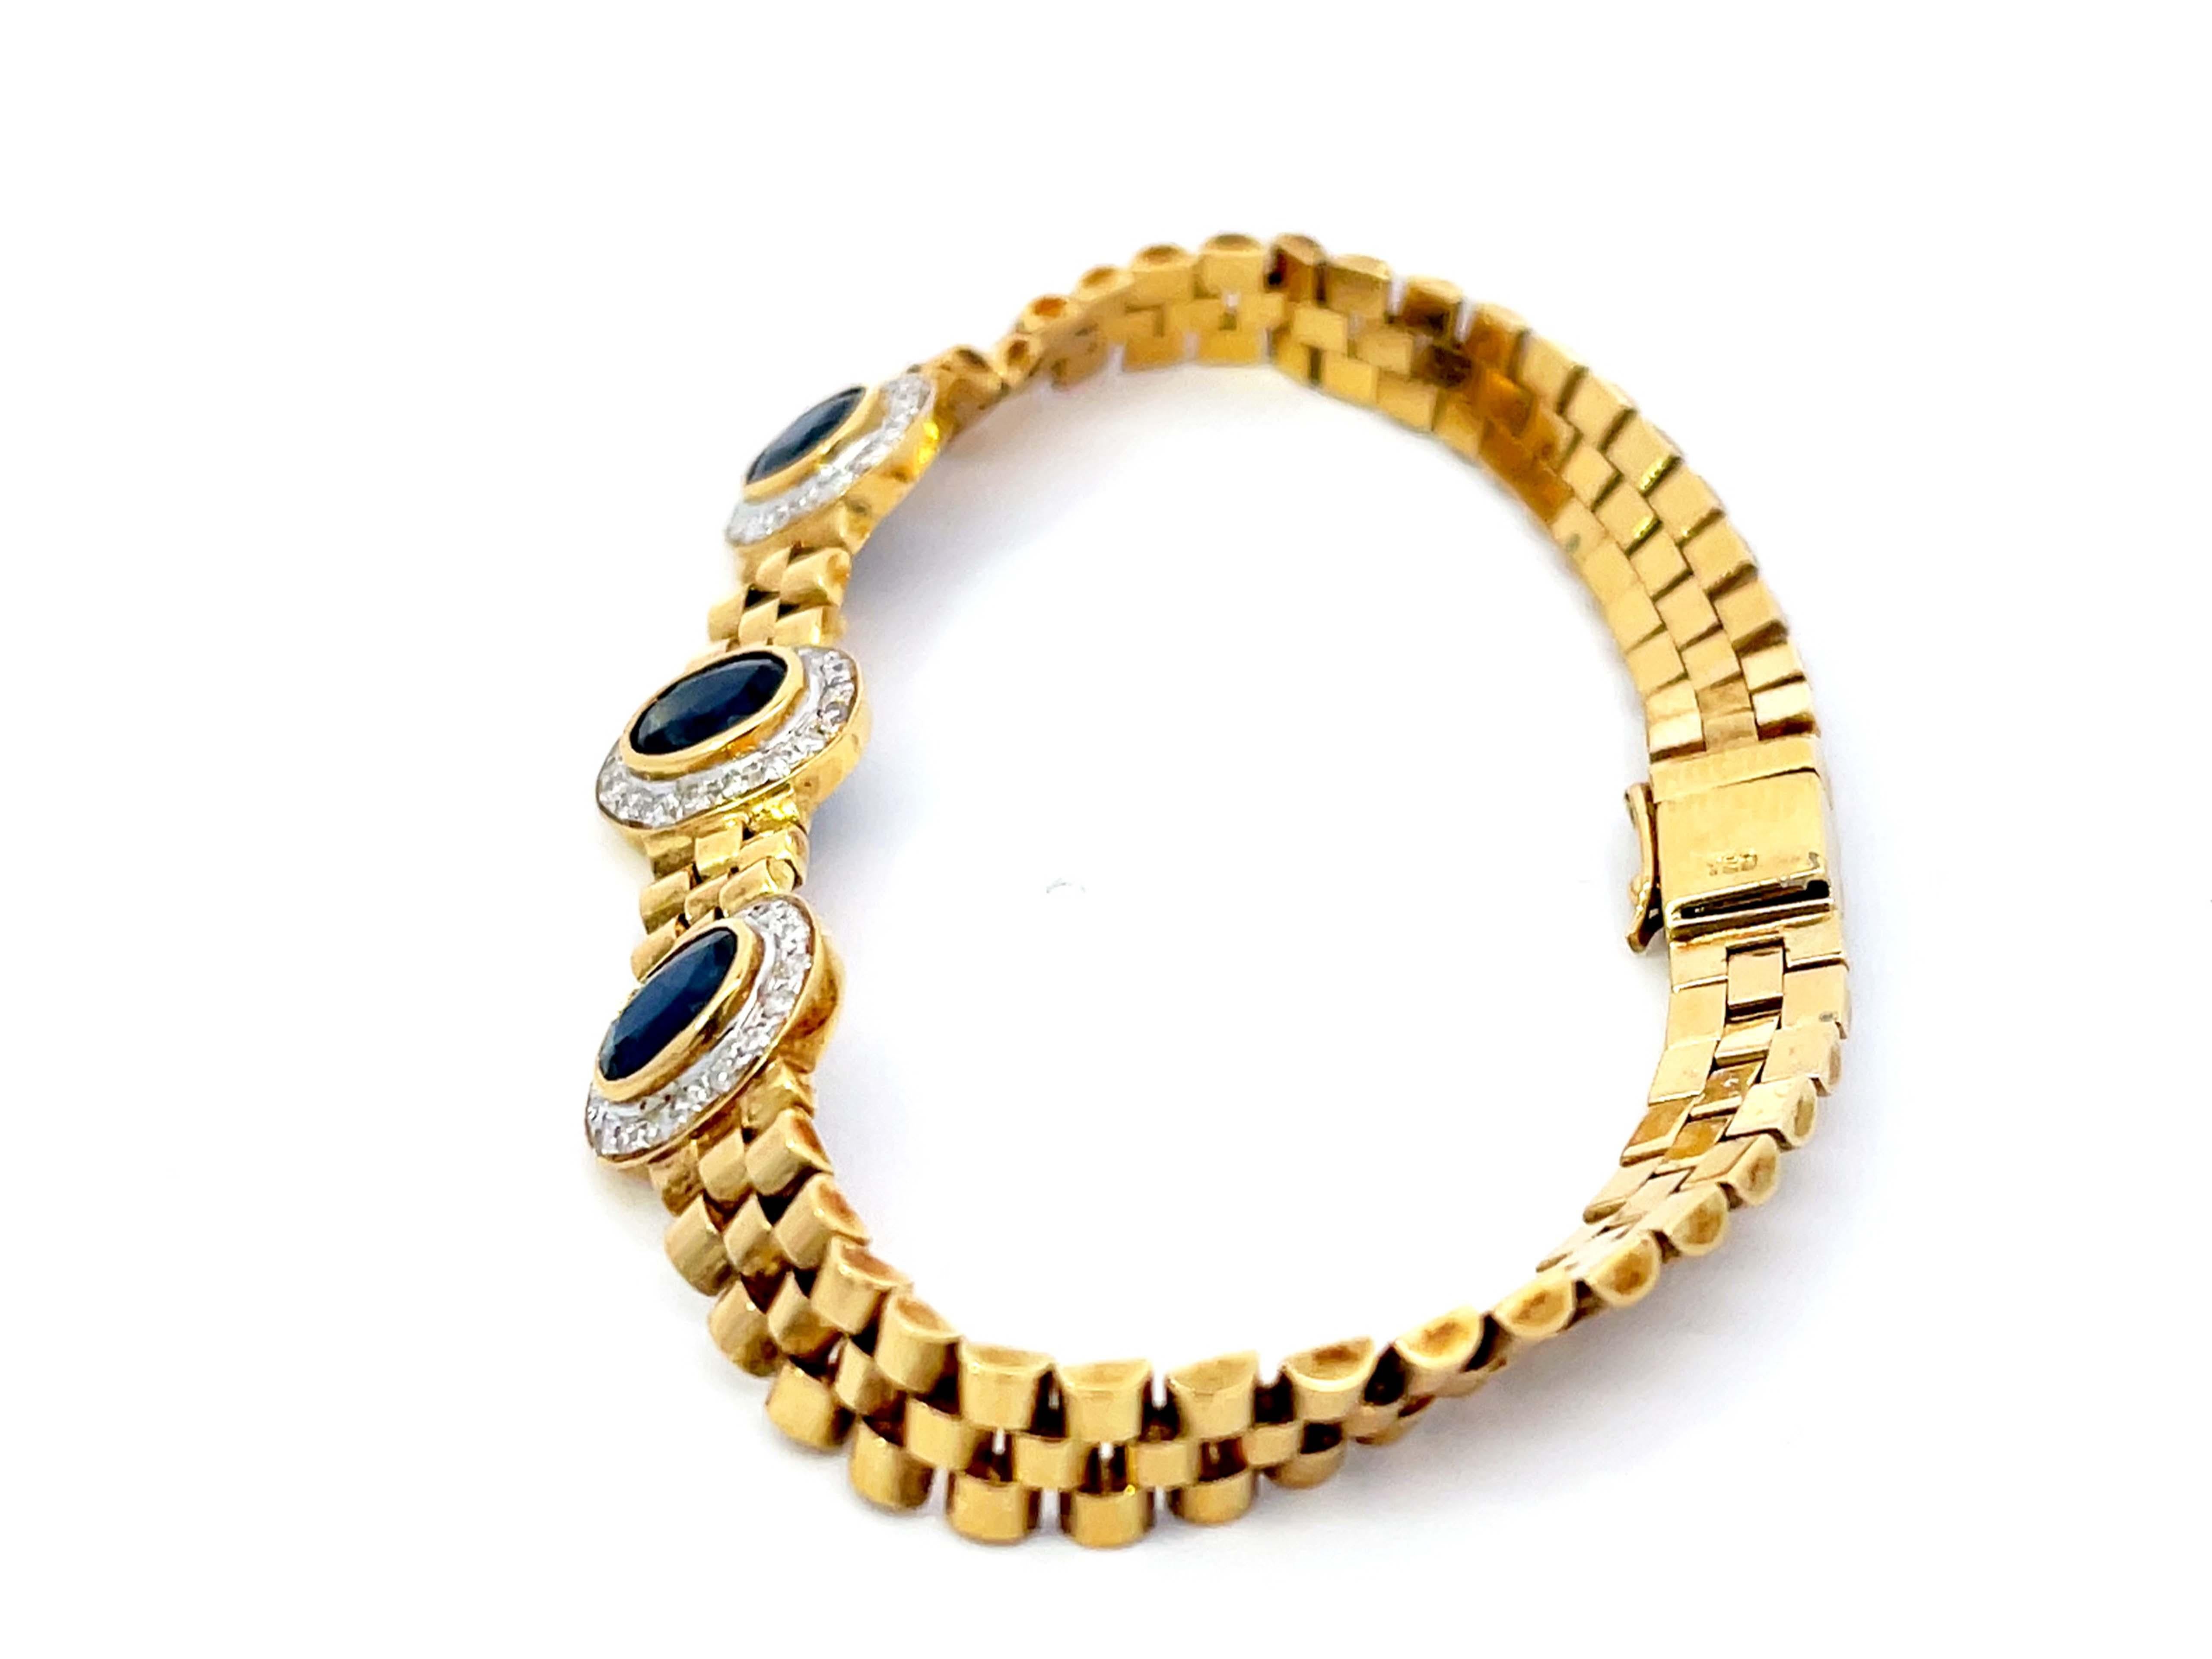 Three Sapphire Diamond Halo Link Bracelet in 18k Yellow Gold In Excellent Condition For Sale In Honolulu, HI